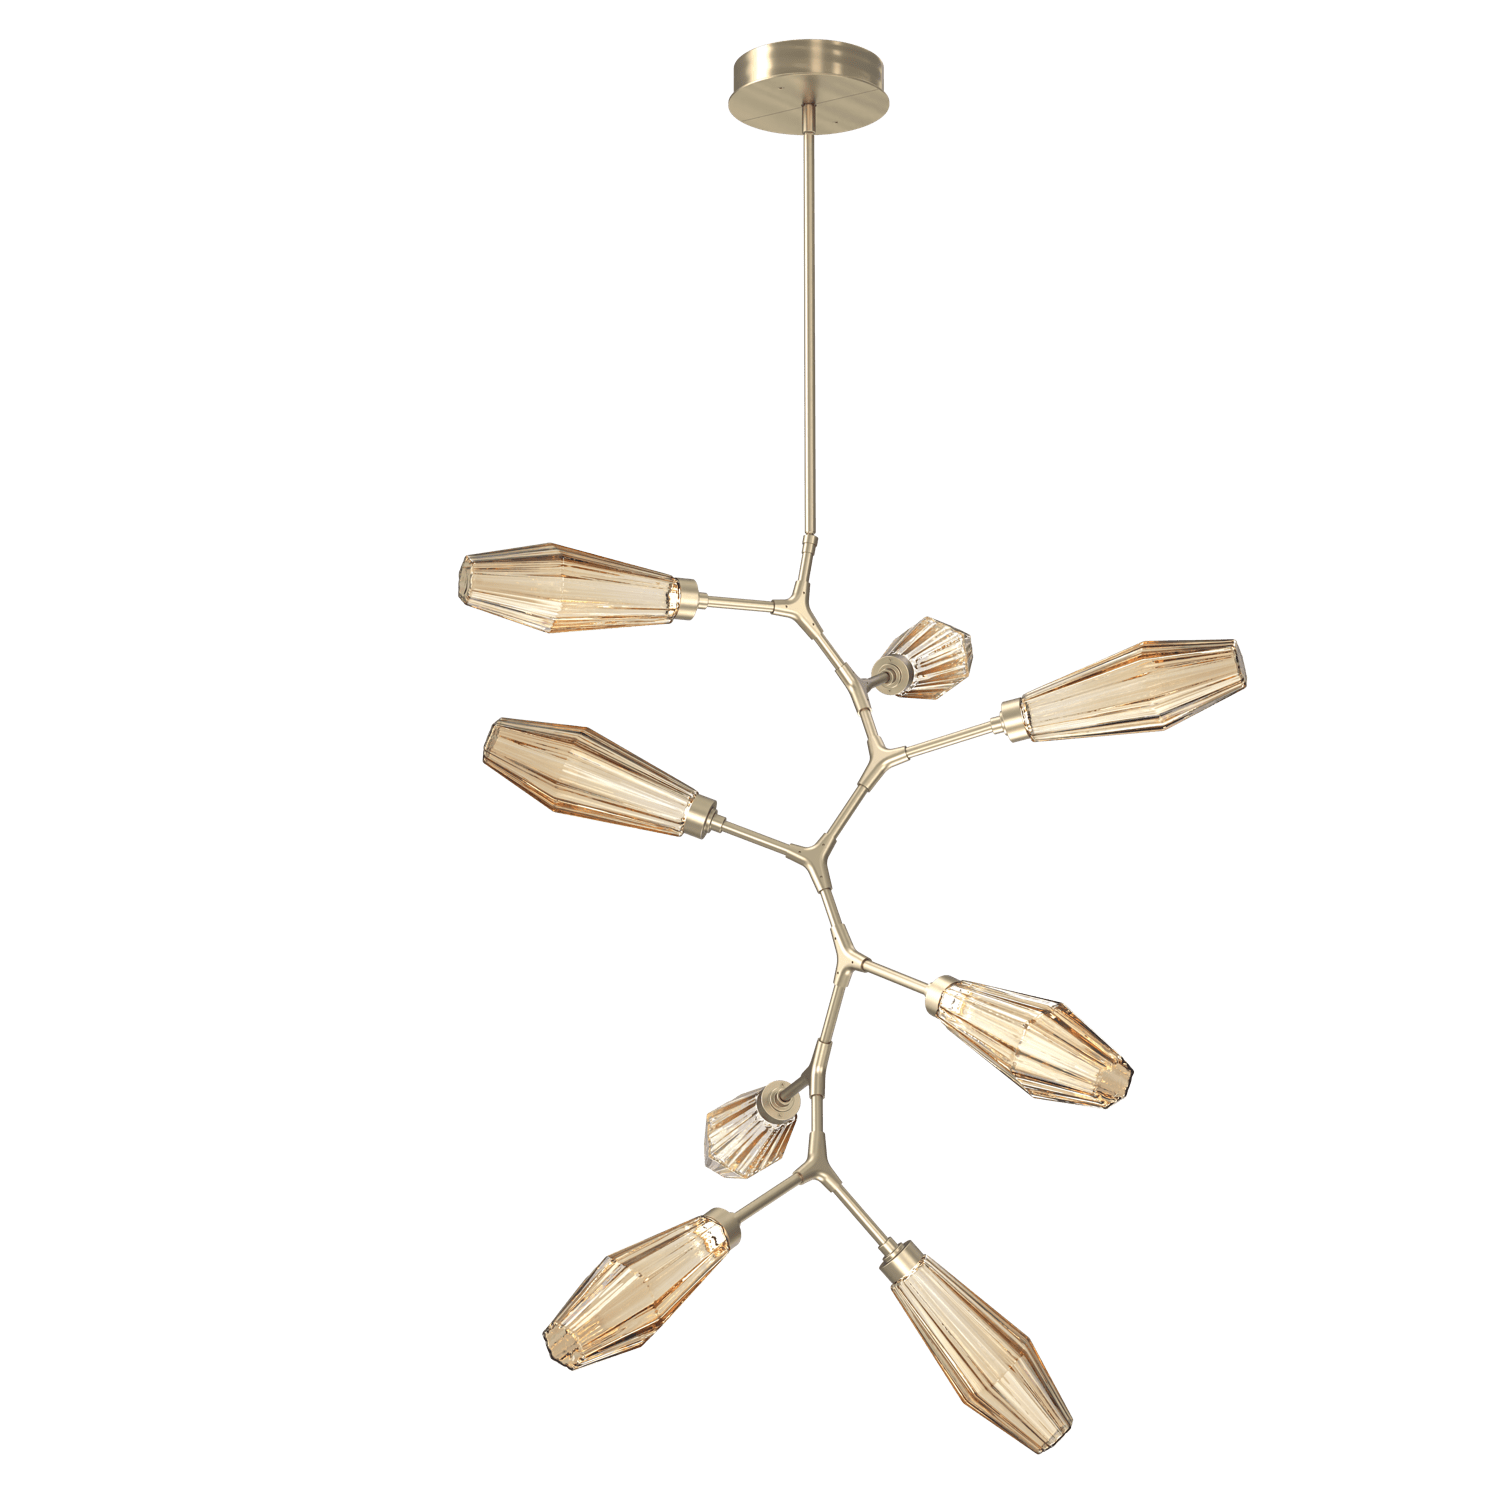 CHB0049-VB-HB-RB-Hammerton-Studio-Aalto-8-light-modern-vine-chandelier-with-heritage-brass-finish-and-optic-ribbed-bronze-glass-shades-and-LED-lamping